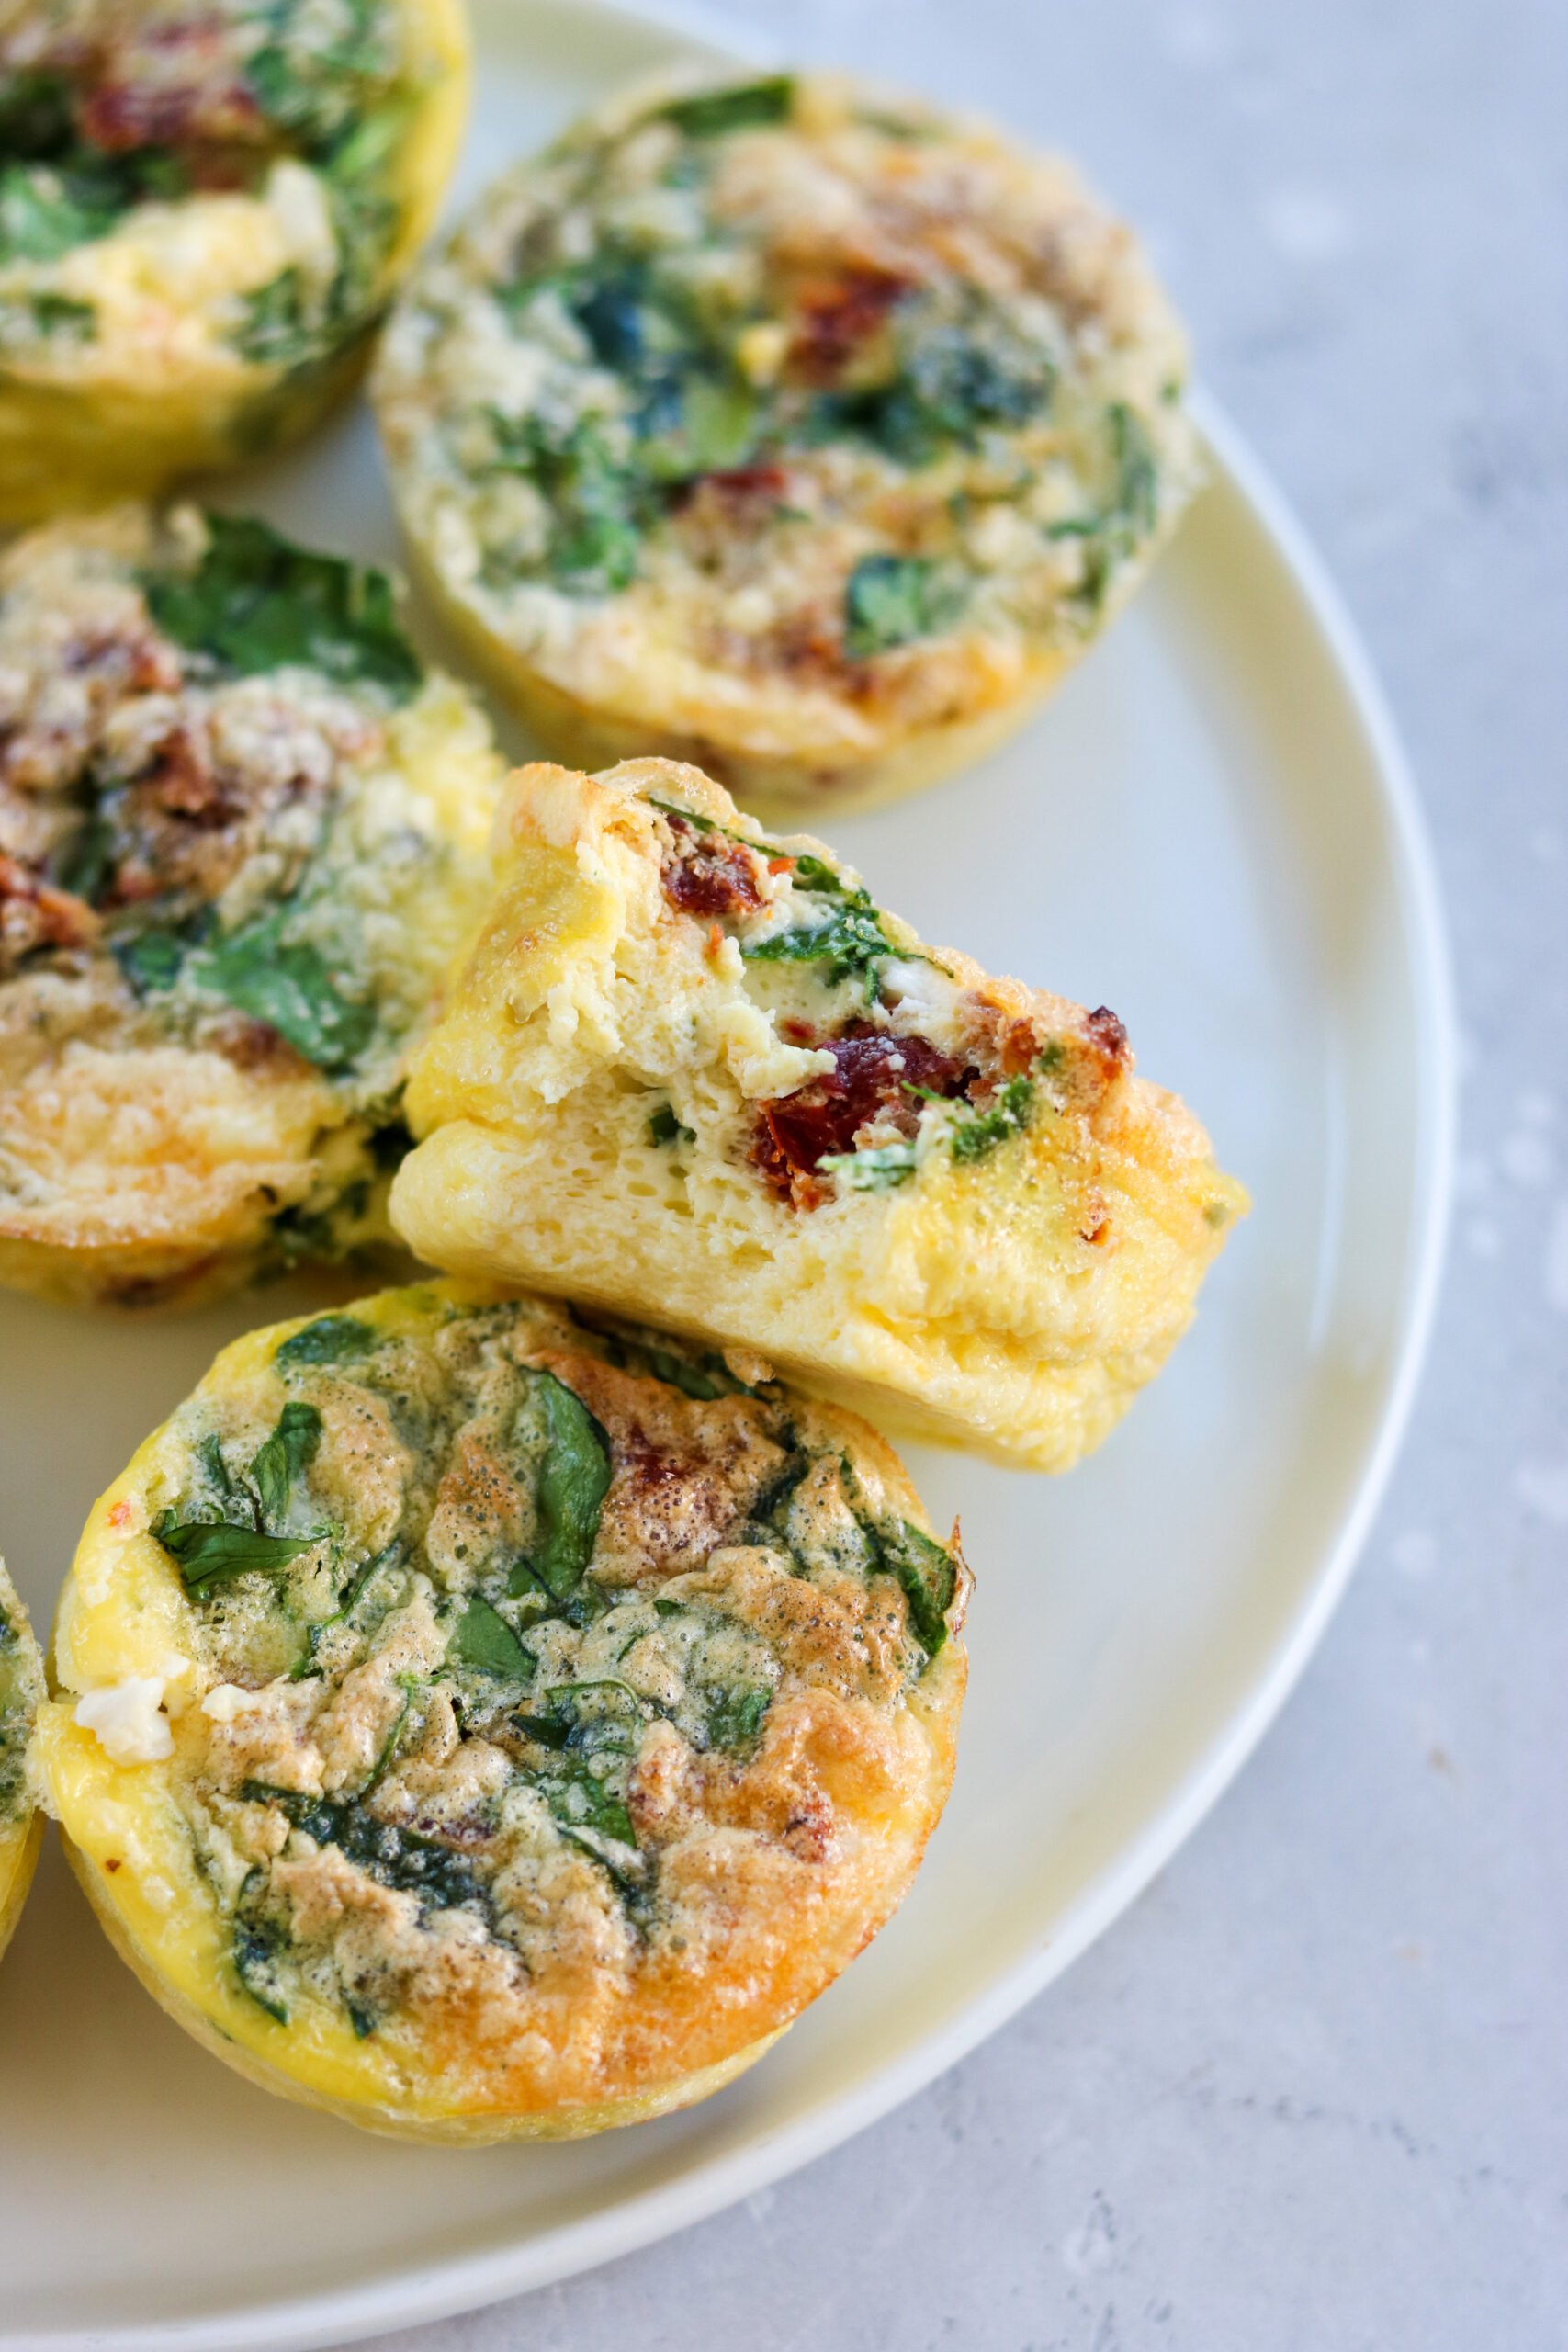 egg bites with spinach, feta, and sun dried tomatoes on a plate with a bite taken out of one